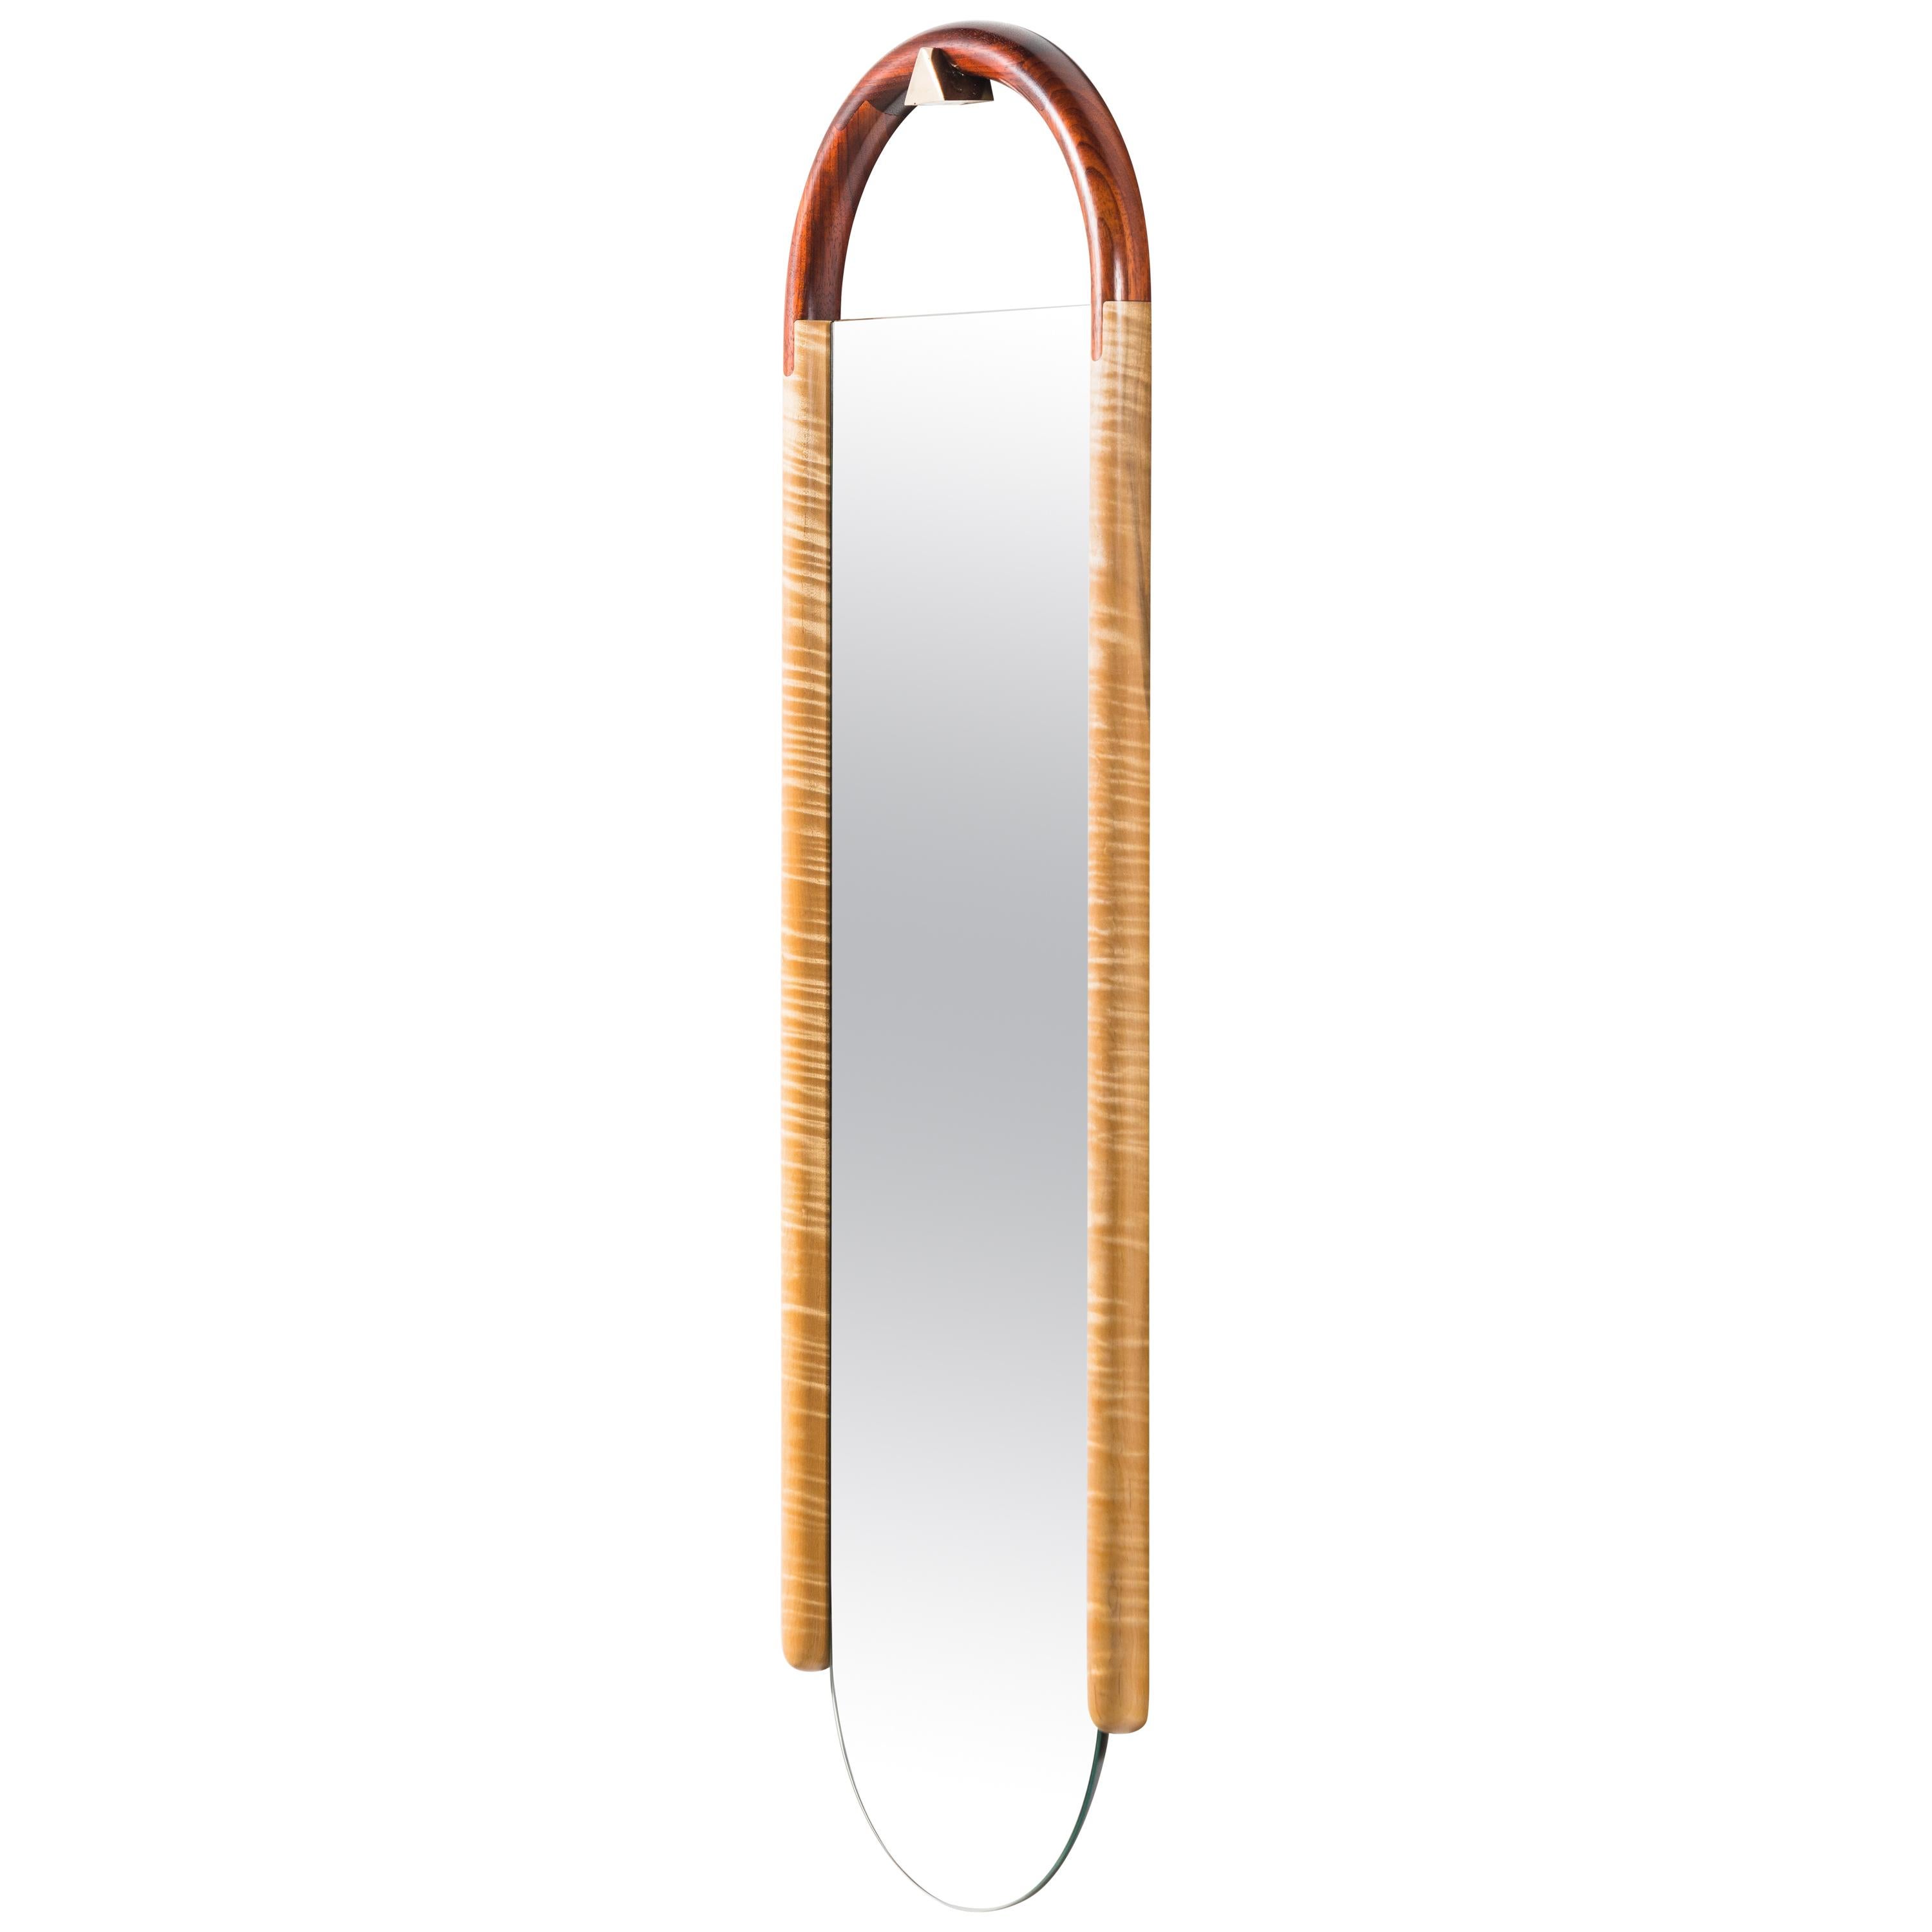 Halo Mirror in Padouk and Curly Maple, Wall Hanging Full Length Mirror